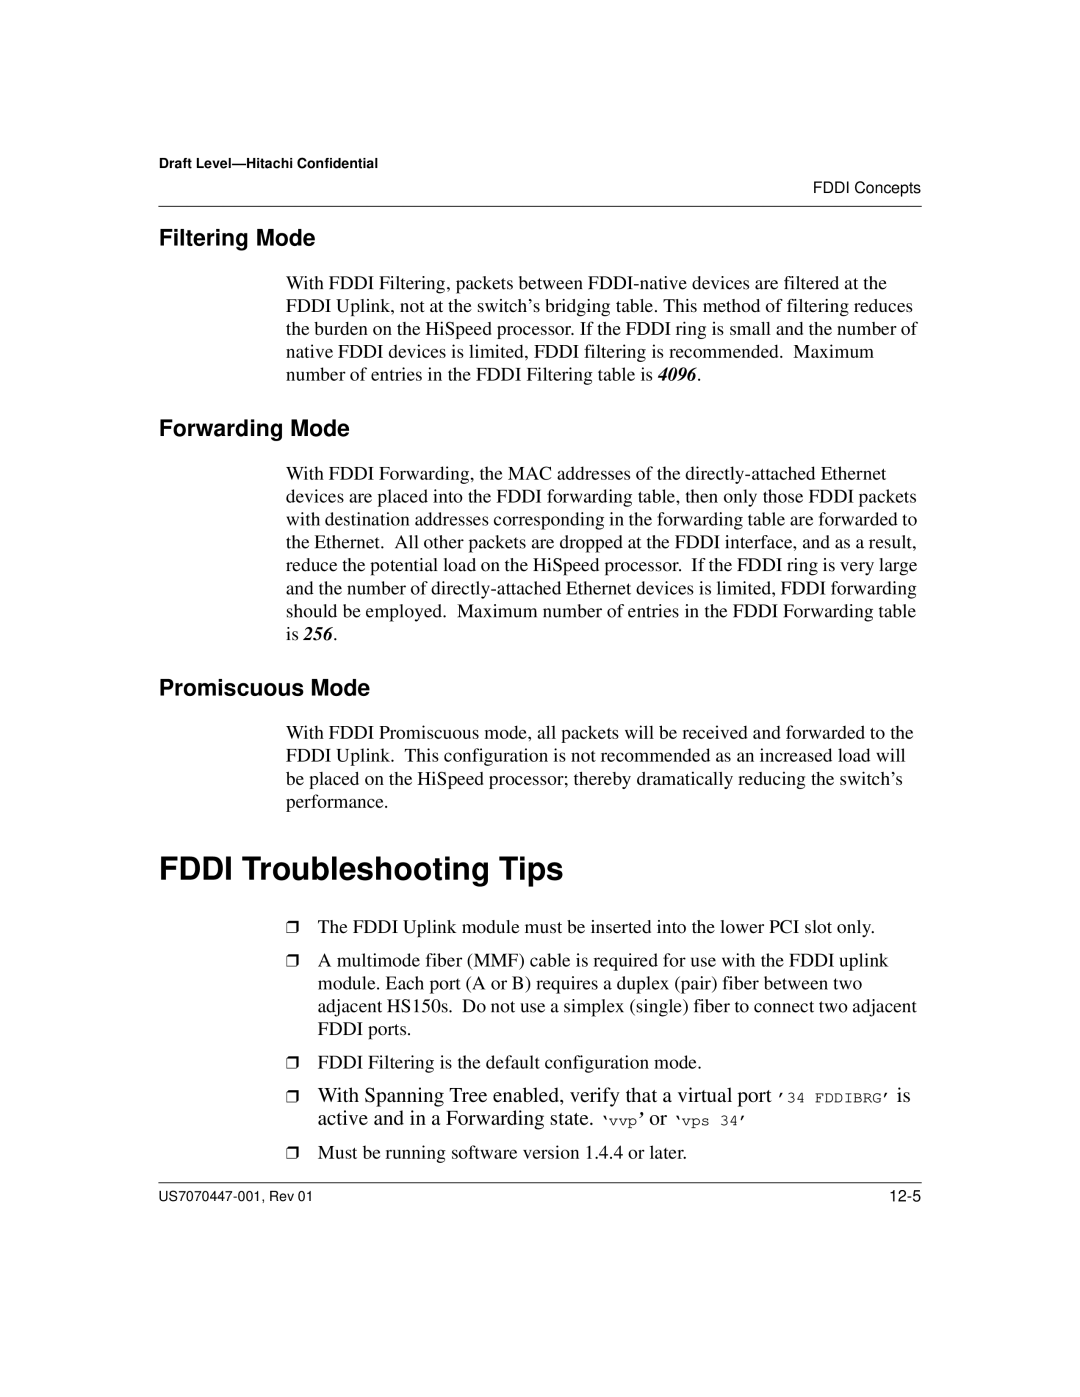 Hitachi US7070447-001 manual FDDI Troubleshooting Tips, Filtering Mode, Forwarding Mode, Promiscuous Mode 